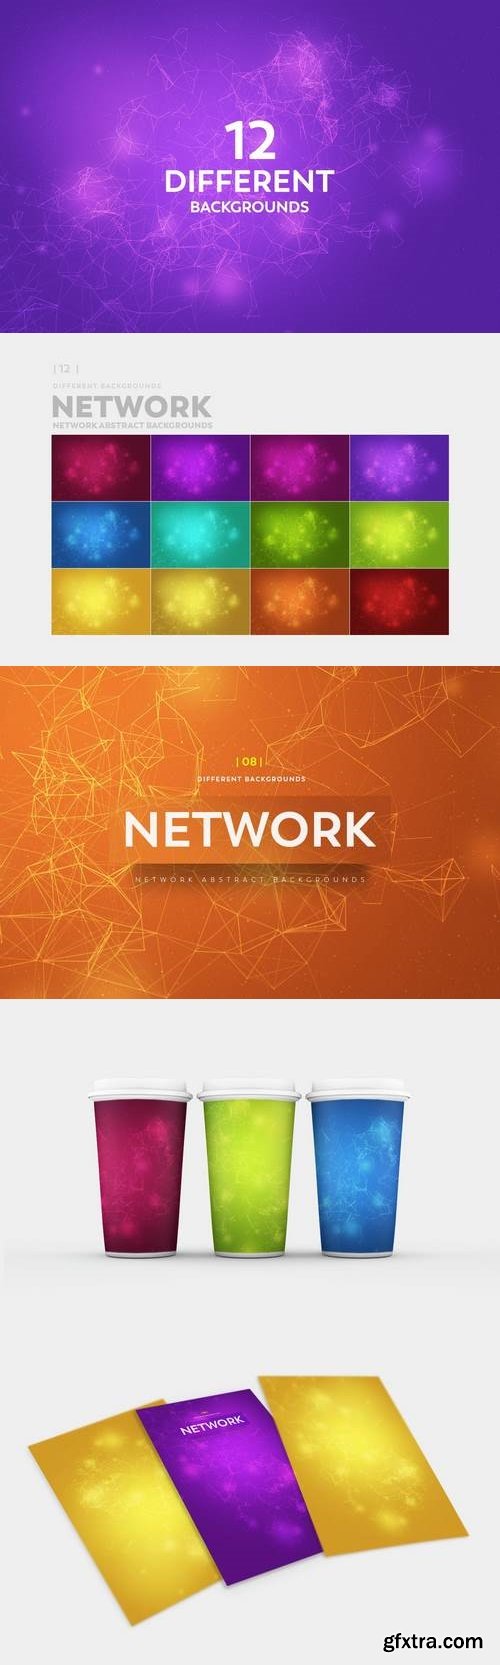 Network Abstract Backgrounds